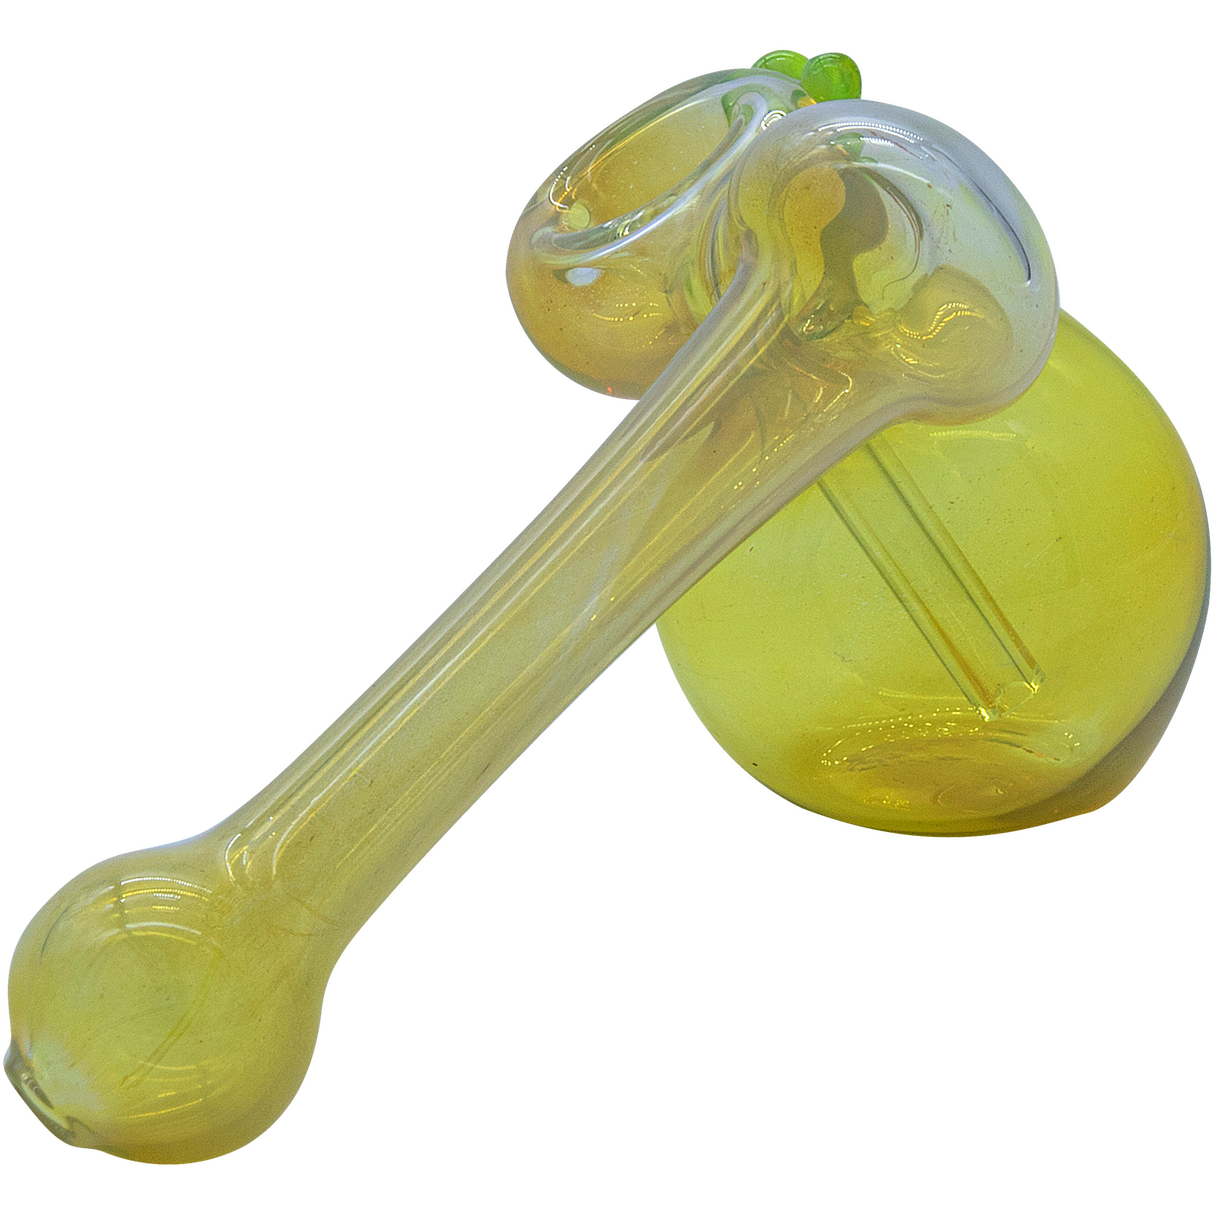 LA Pipes "Silver Sidecar" Fumed Hammer Sidecar Pipe in Green, 6" Borosilicate Glass, USA Made